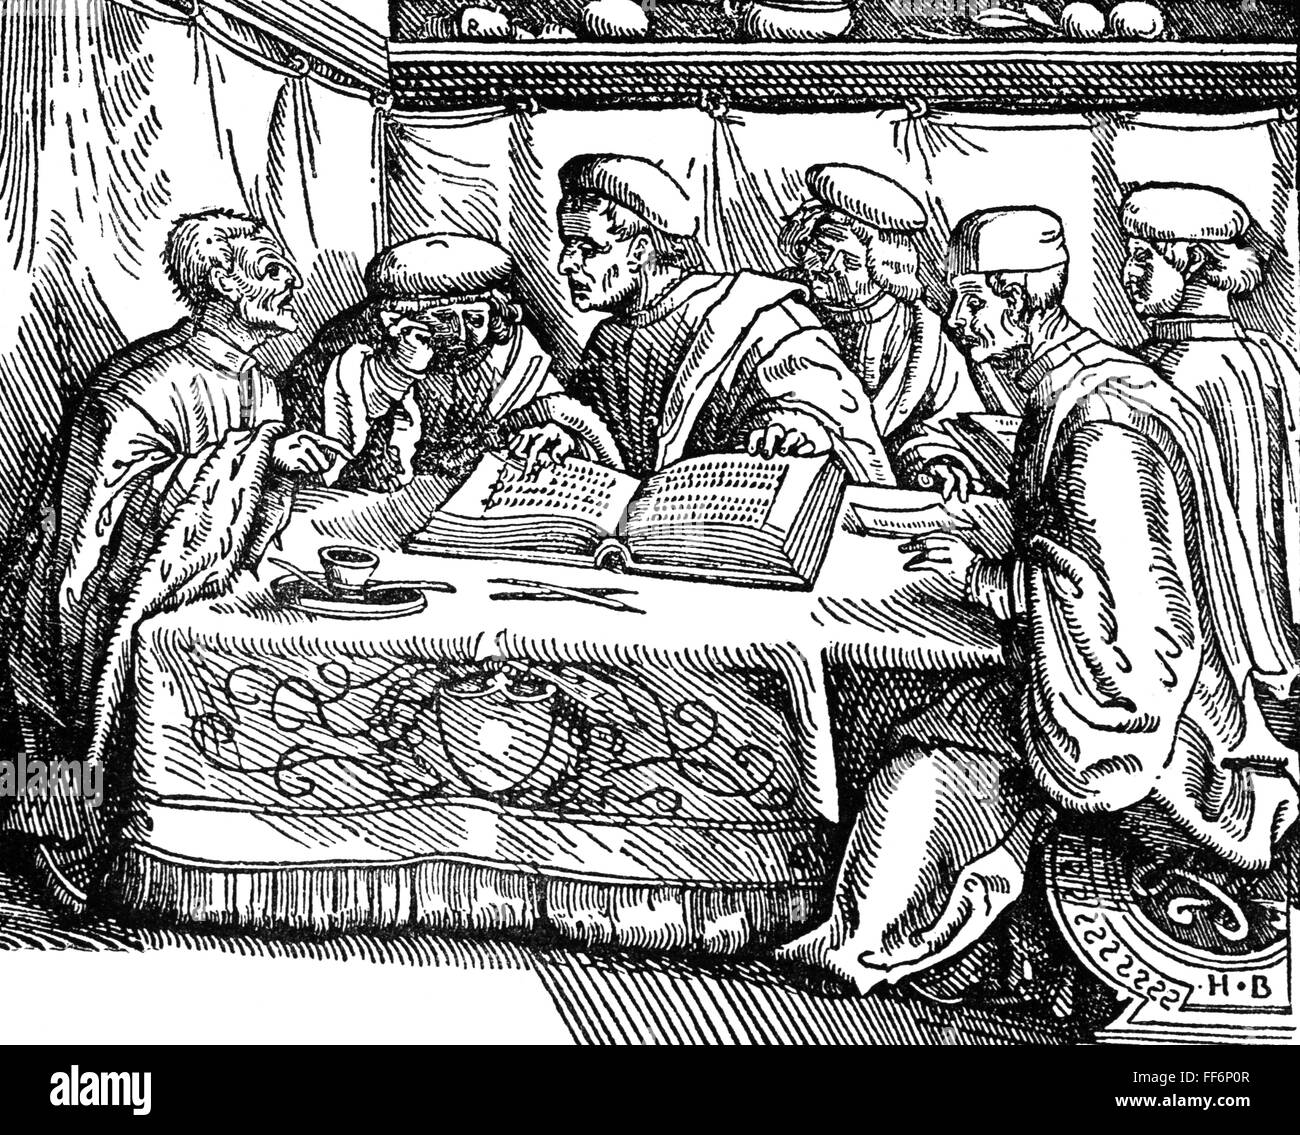 justice,judges,council of judges,woodcut,by Hans Burgkmair(1473 - 1531),16th century,16th century,graphic,graphics,jurisdiction,court of justice,courts of justice,occupation,occupations,half length,sitting,sit,table,tables,book,books,reading,read,discussion,discussions,counsels,counsellings,consultation,consultations,counsel,counseling,counselling,counseled,conversation,conversations,talks,talking,talk,judiciary,council,councils,judges,referee,associate judge,woodcut,woodcuts,historic,historical,male,man,men,p,Additional-Rights-Clearences-Not Available Stock Photo